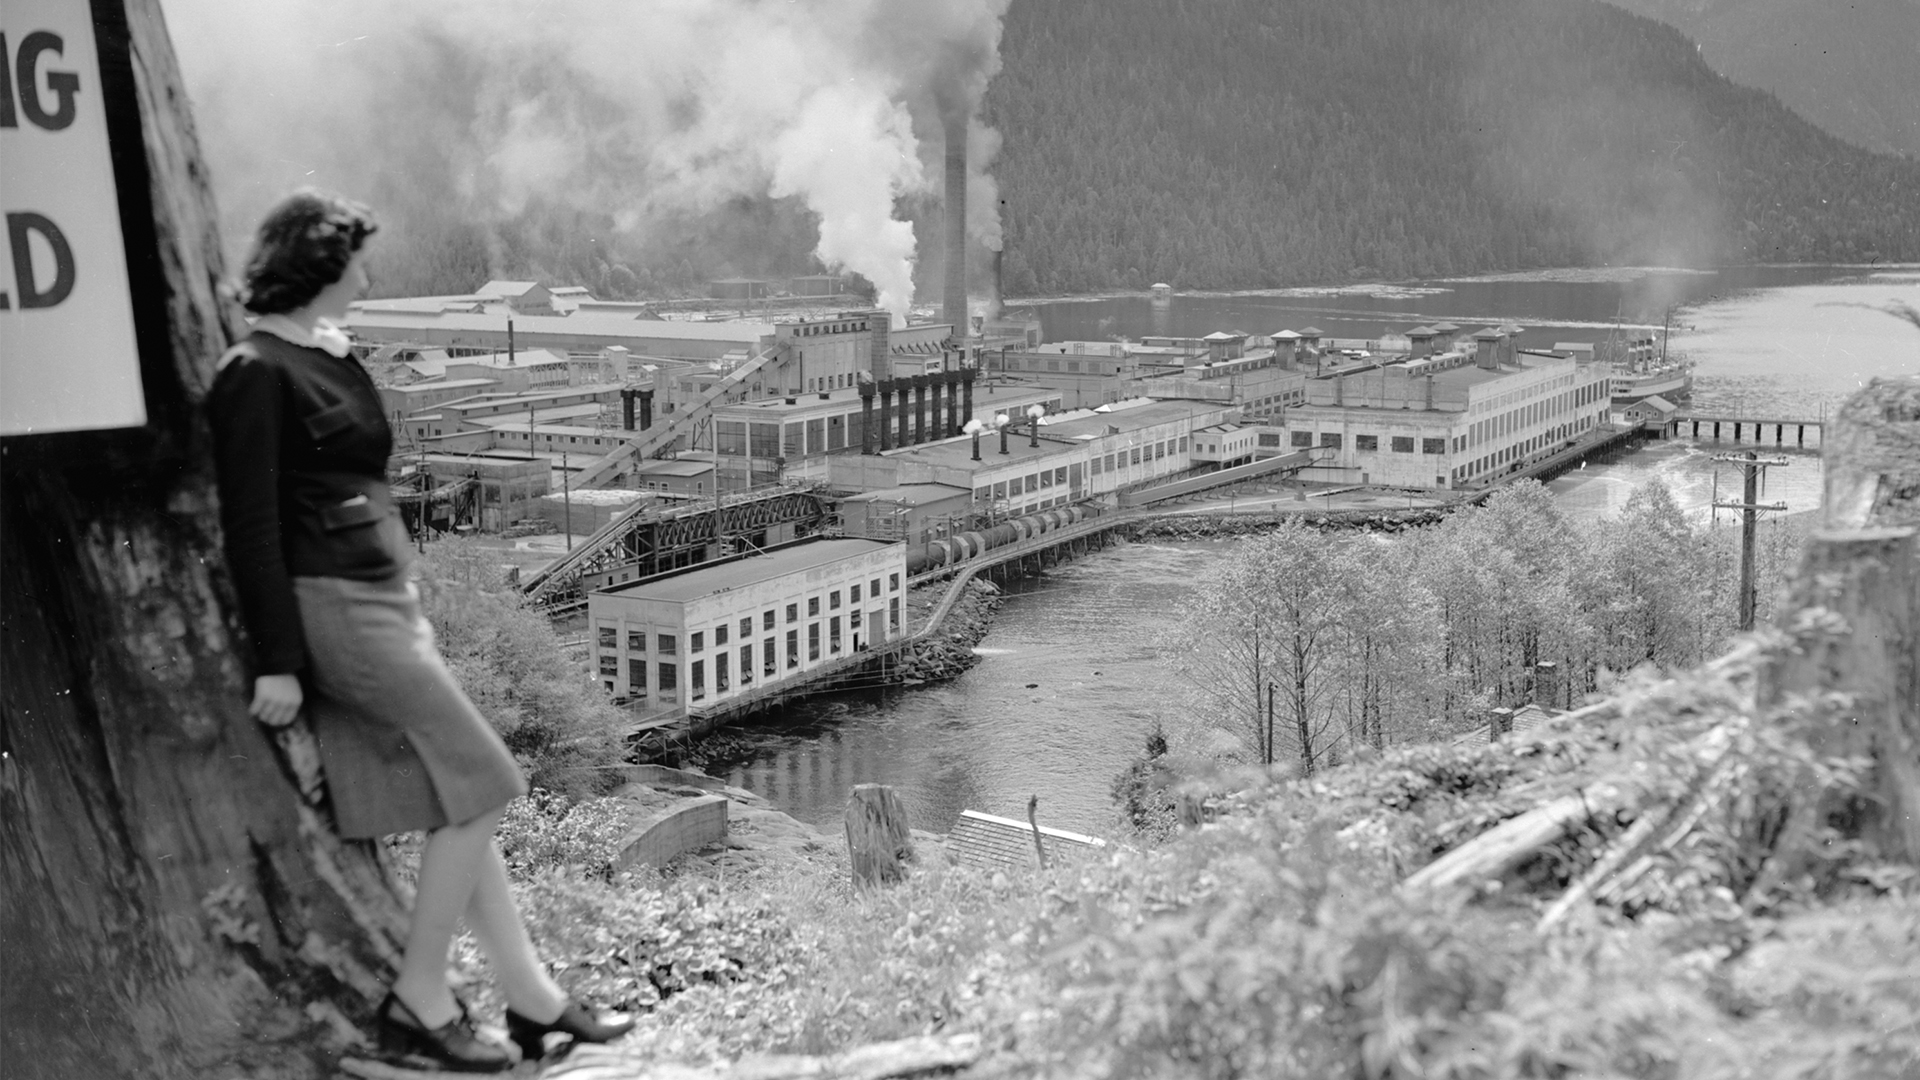 Working People: A History of Labour in British Columbia - E22 - Ocean Falls